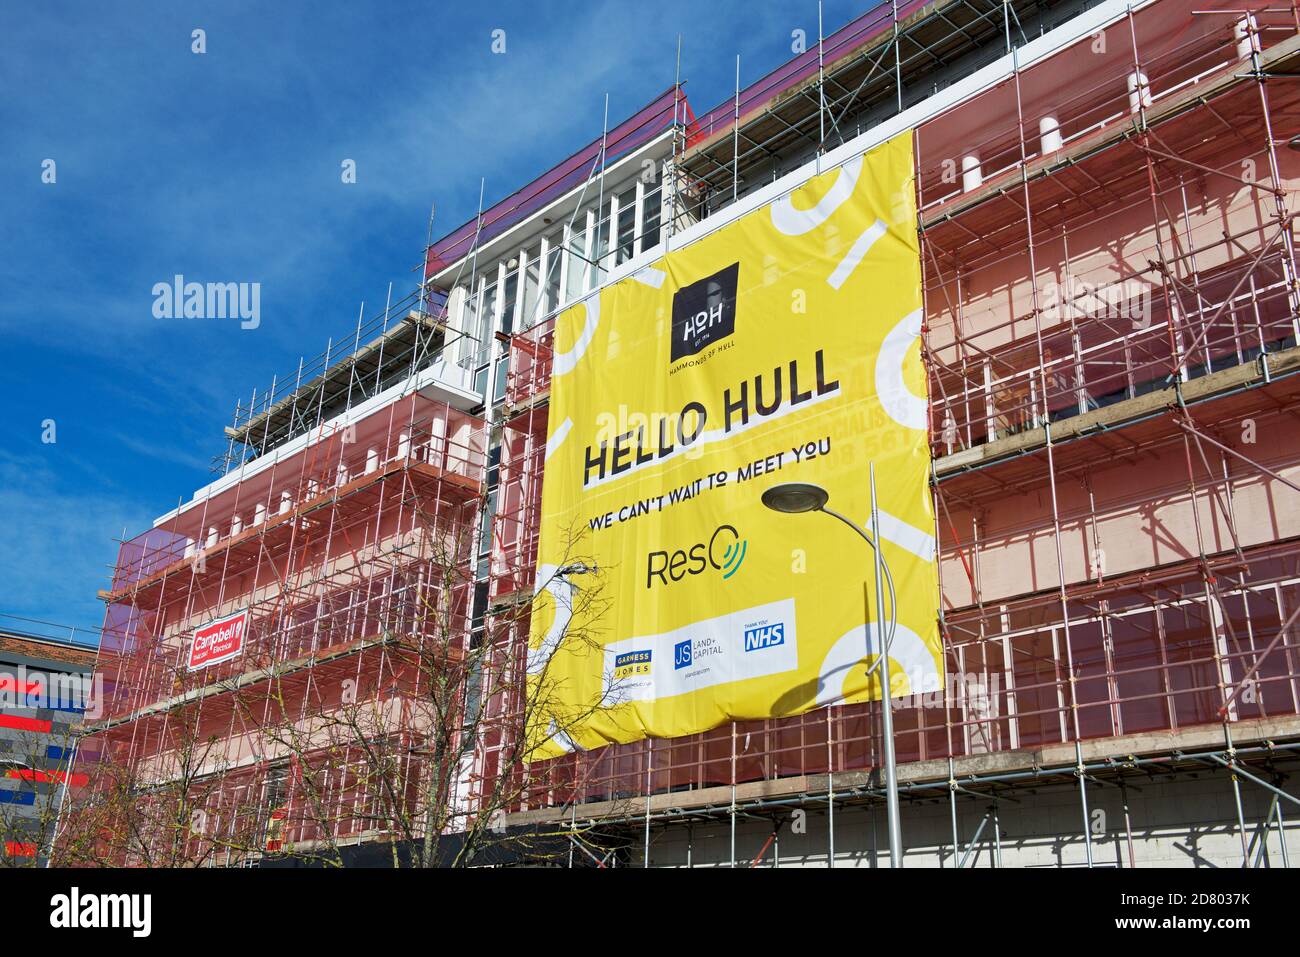 Banner - Hello Hull - on building restoration in Hull, East Yorkshire, England UK Stock Photo